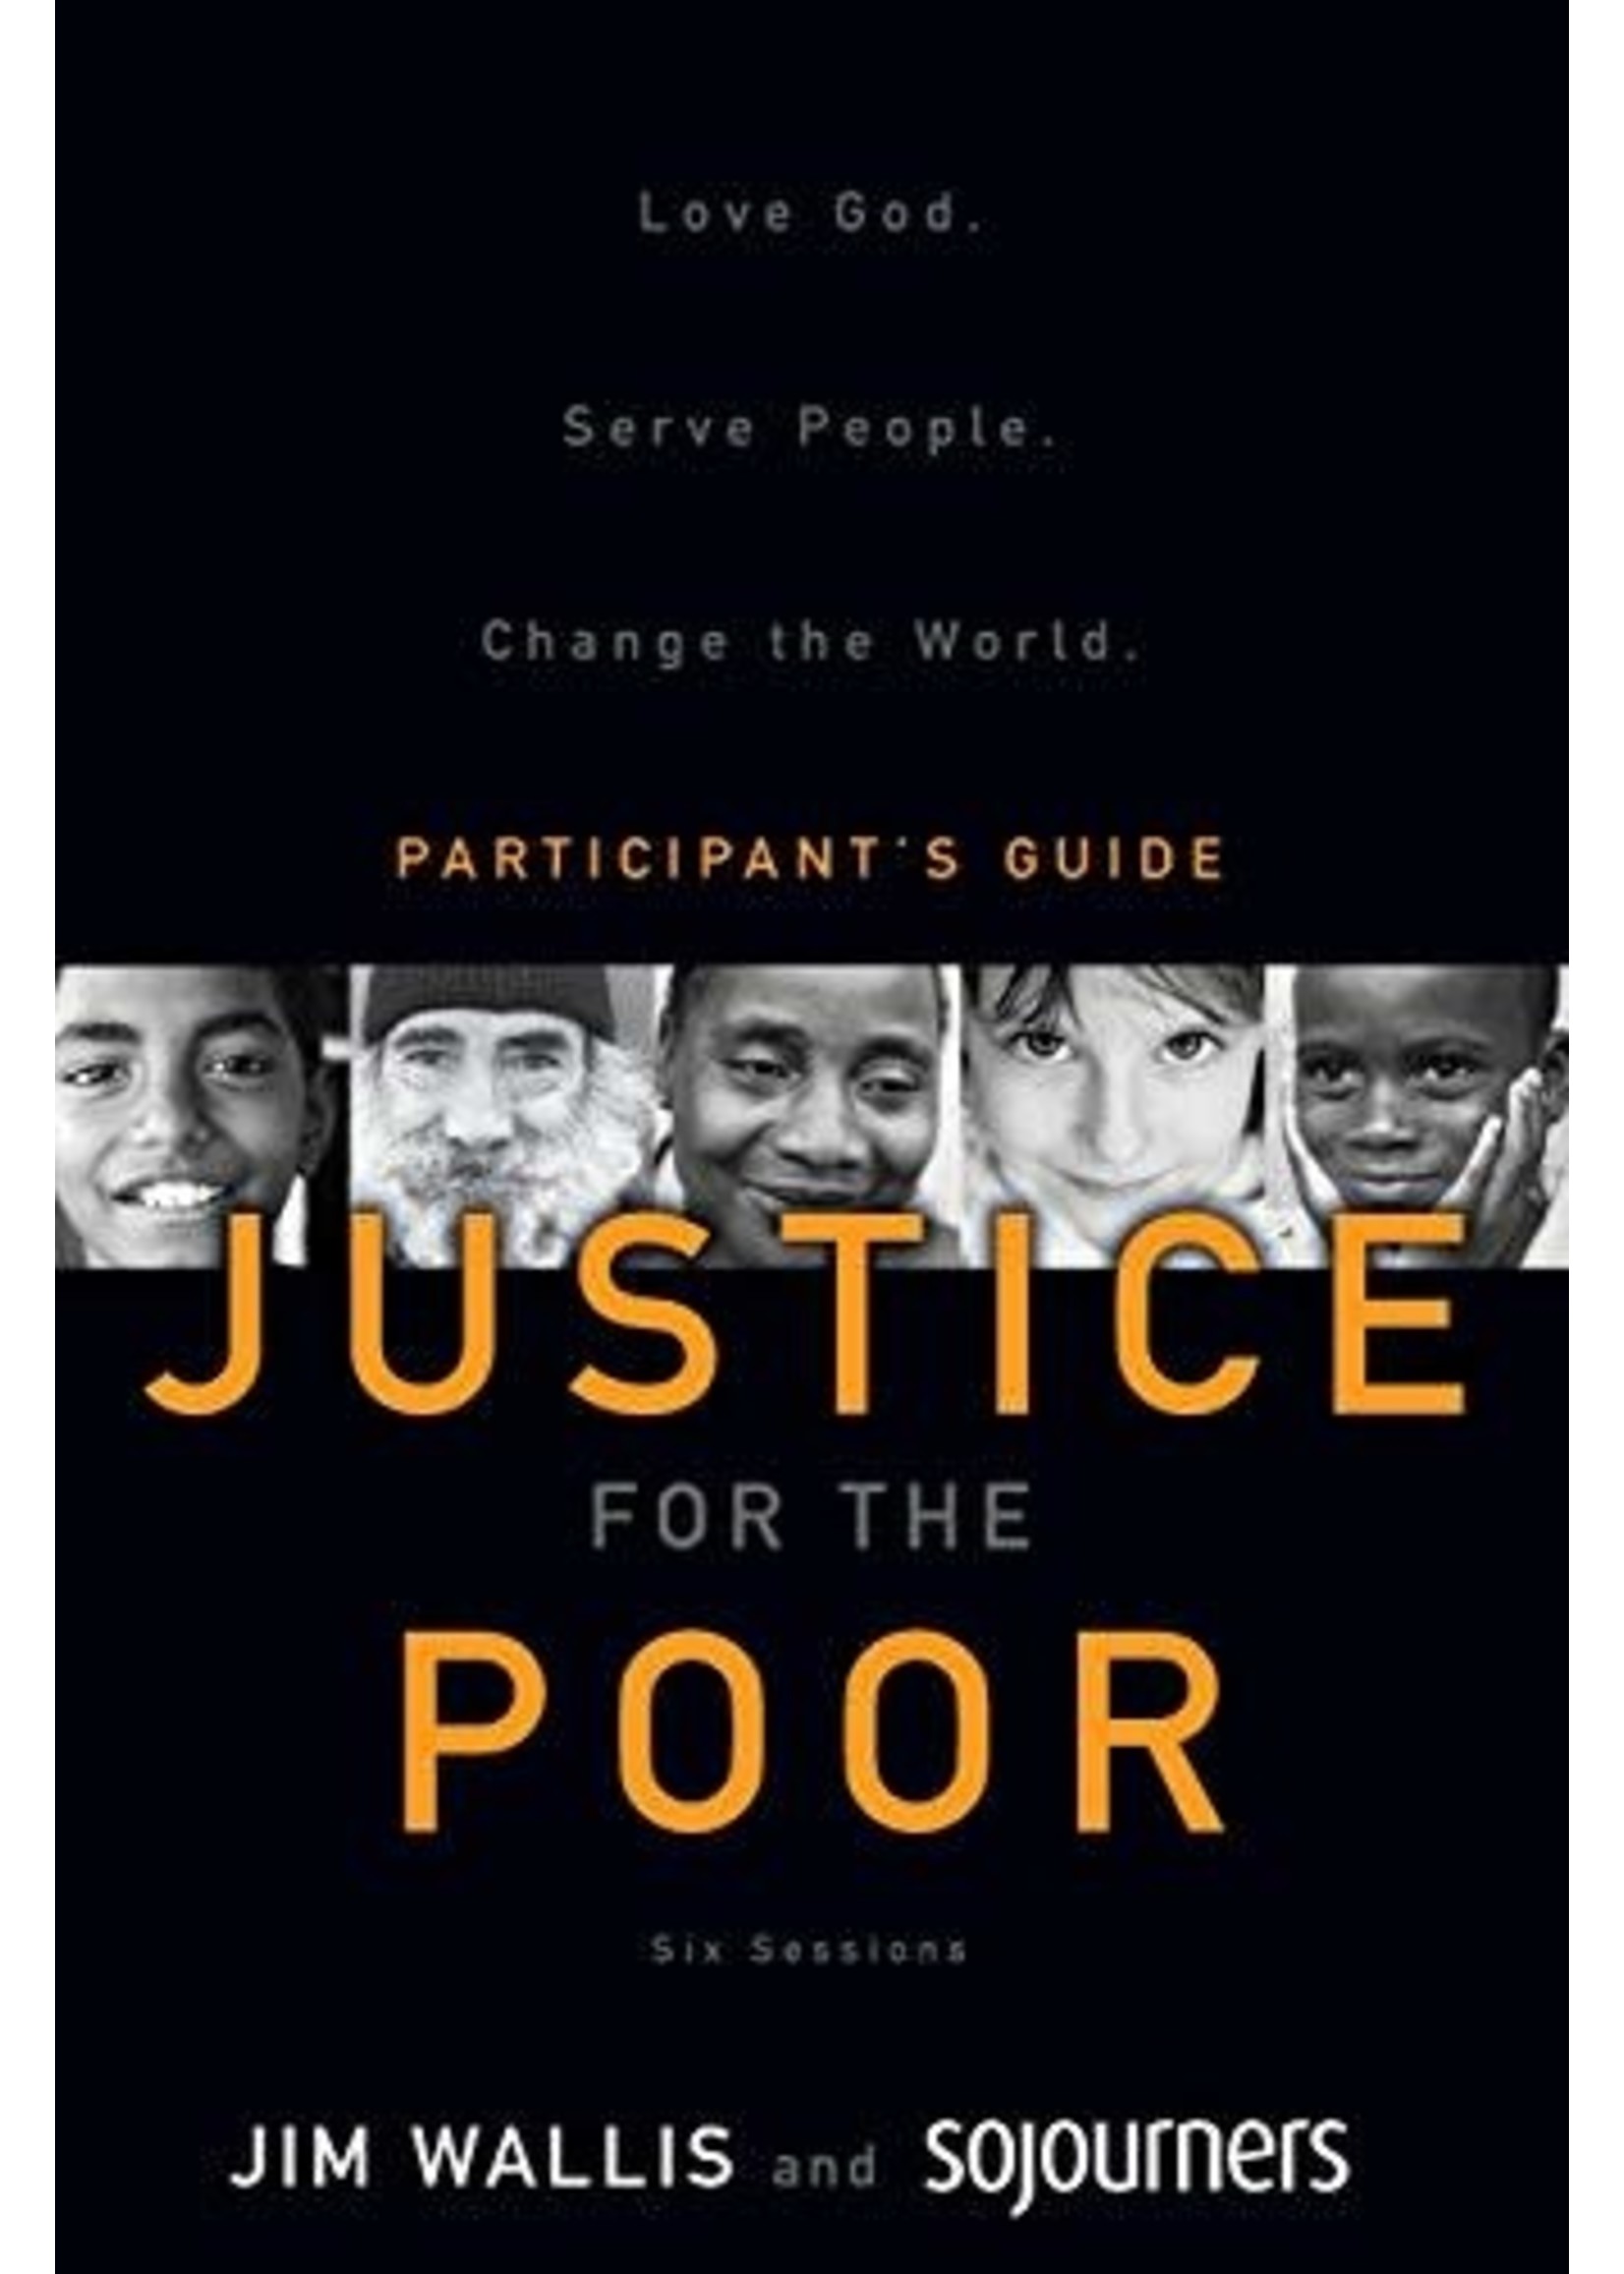 Justice for the Poor: Love God - Serve People - Change the World